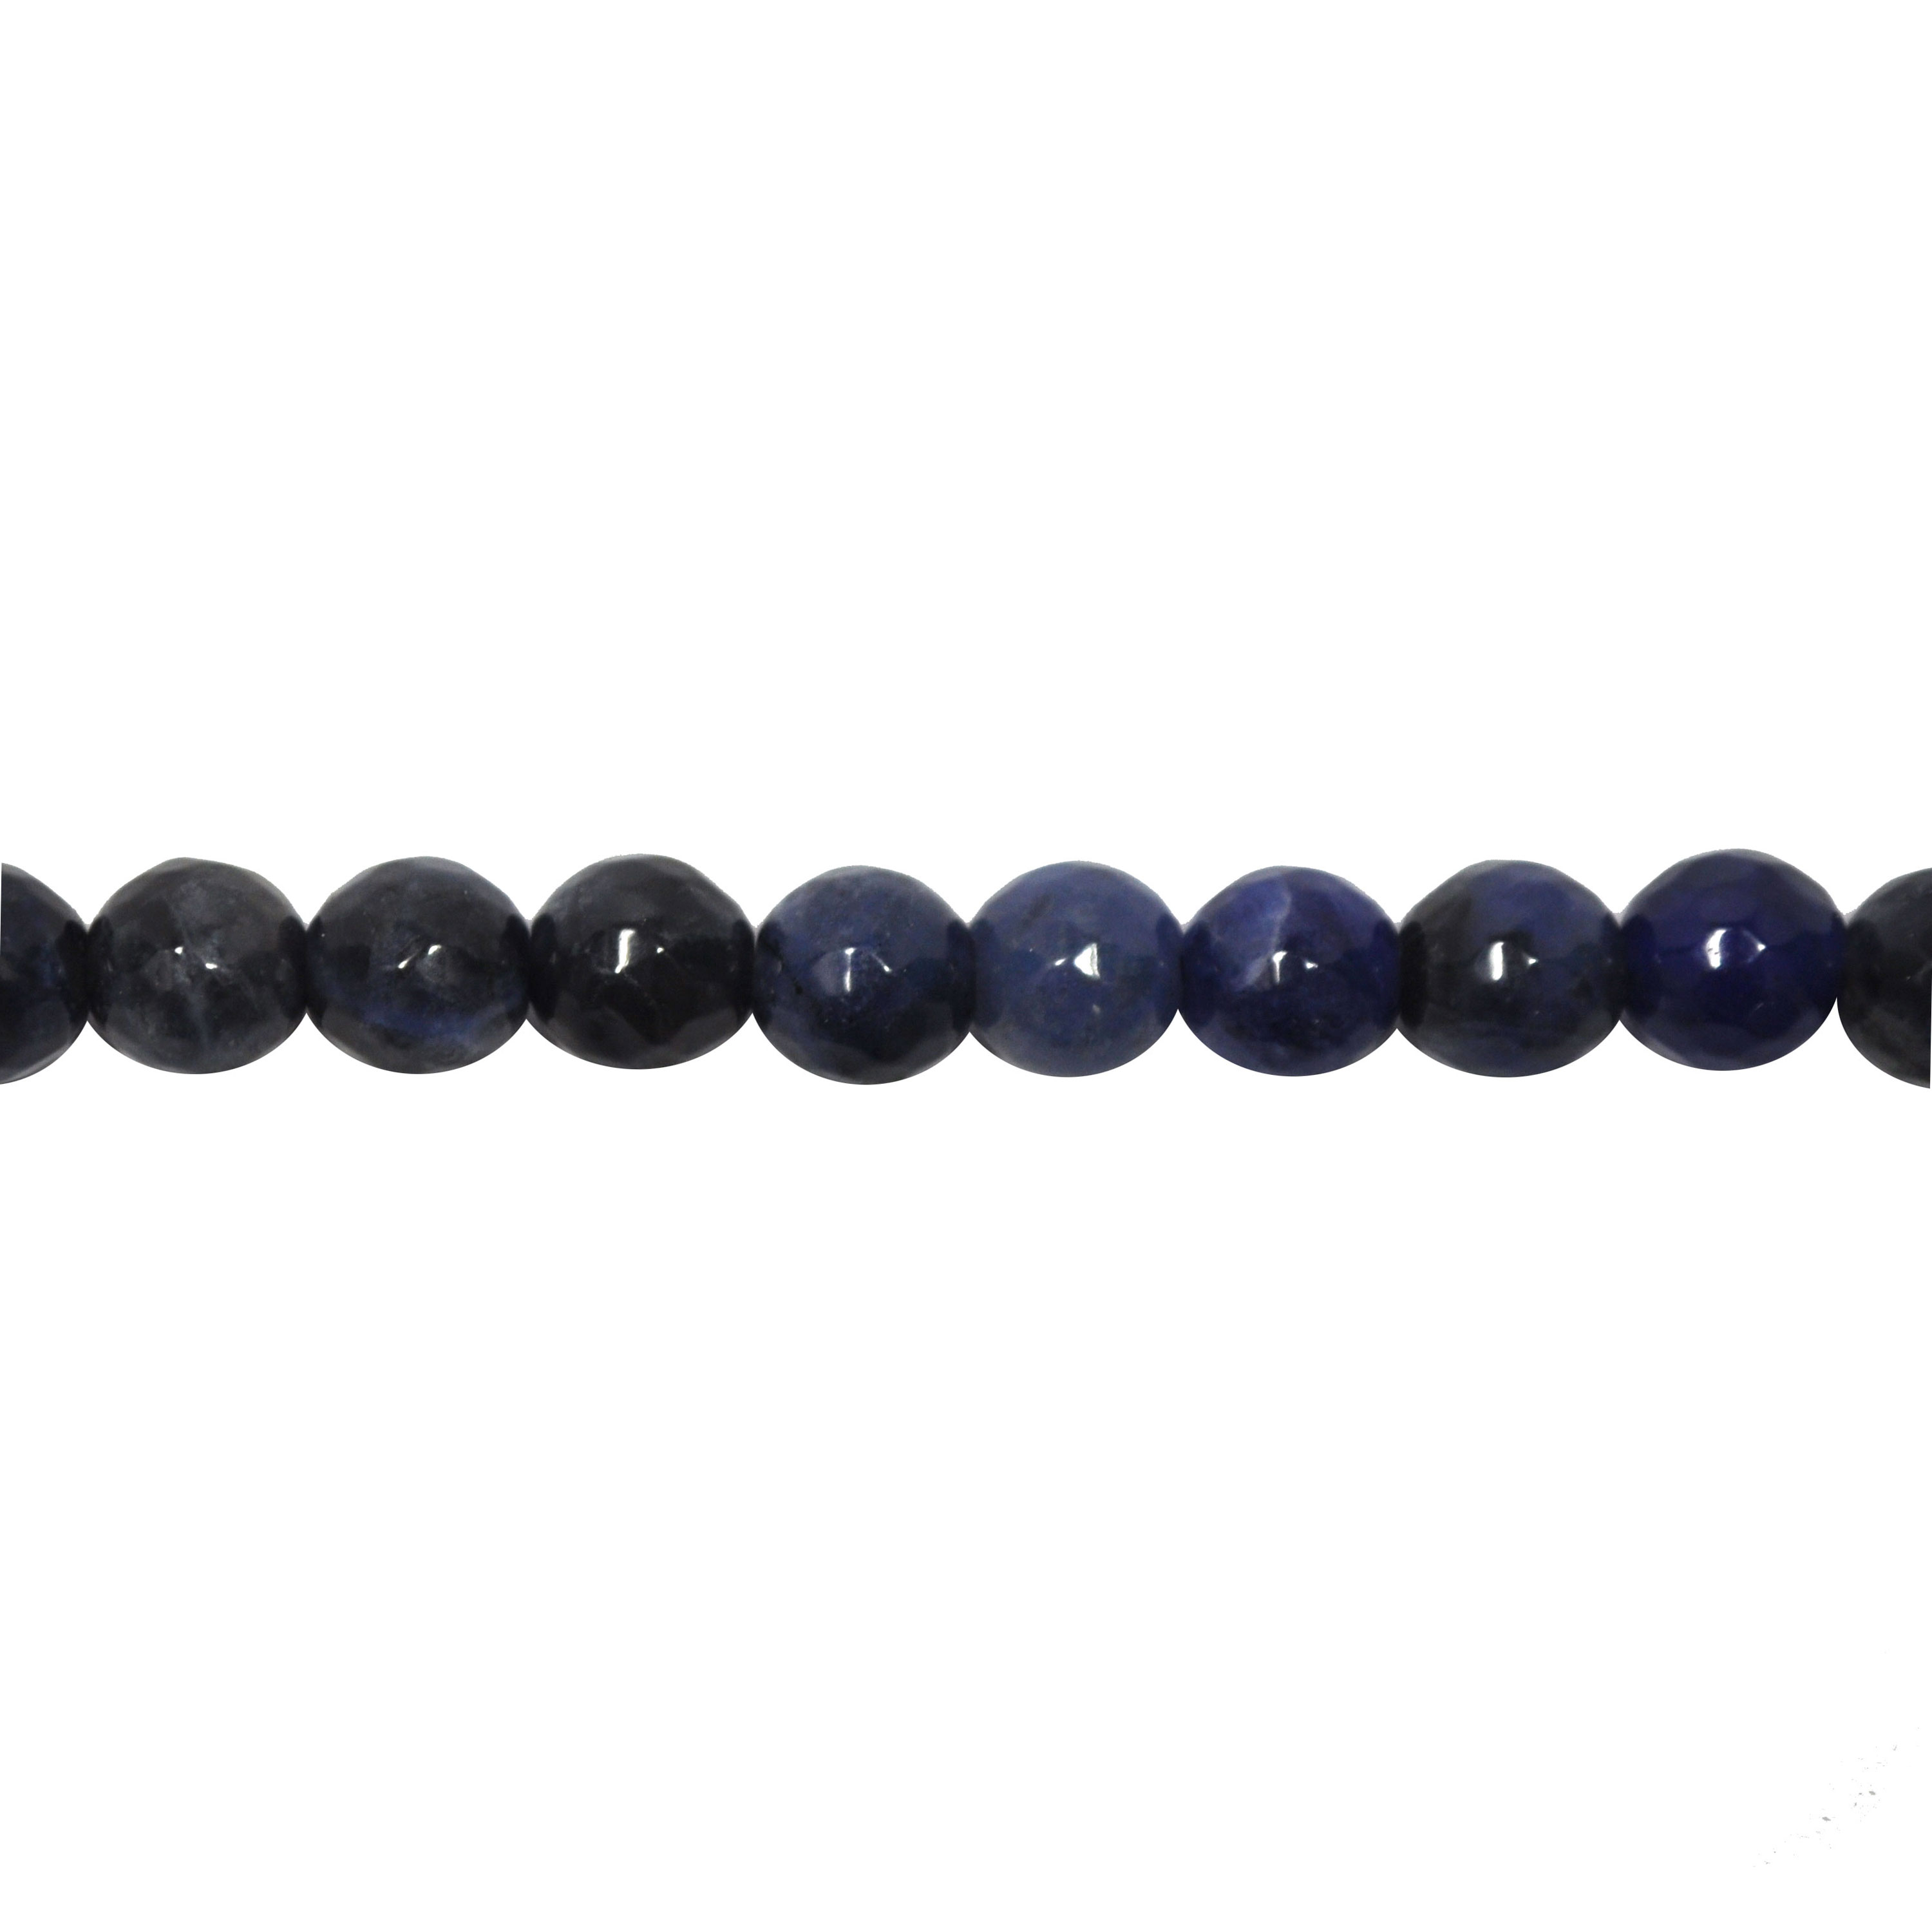 6mm Sodalite - Faceted